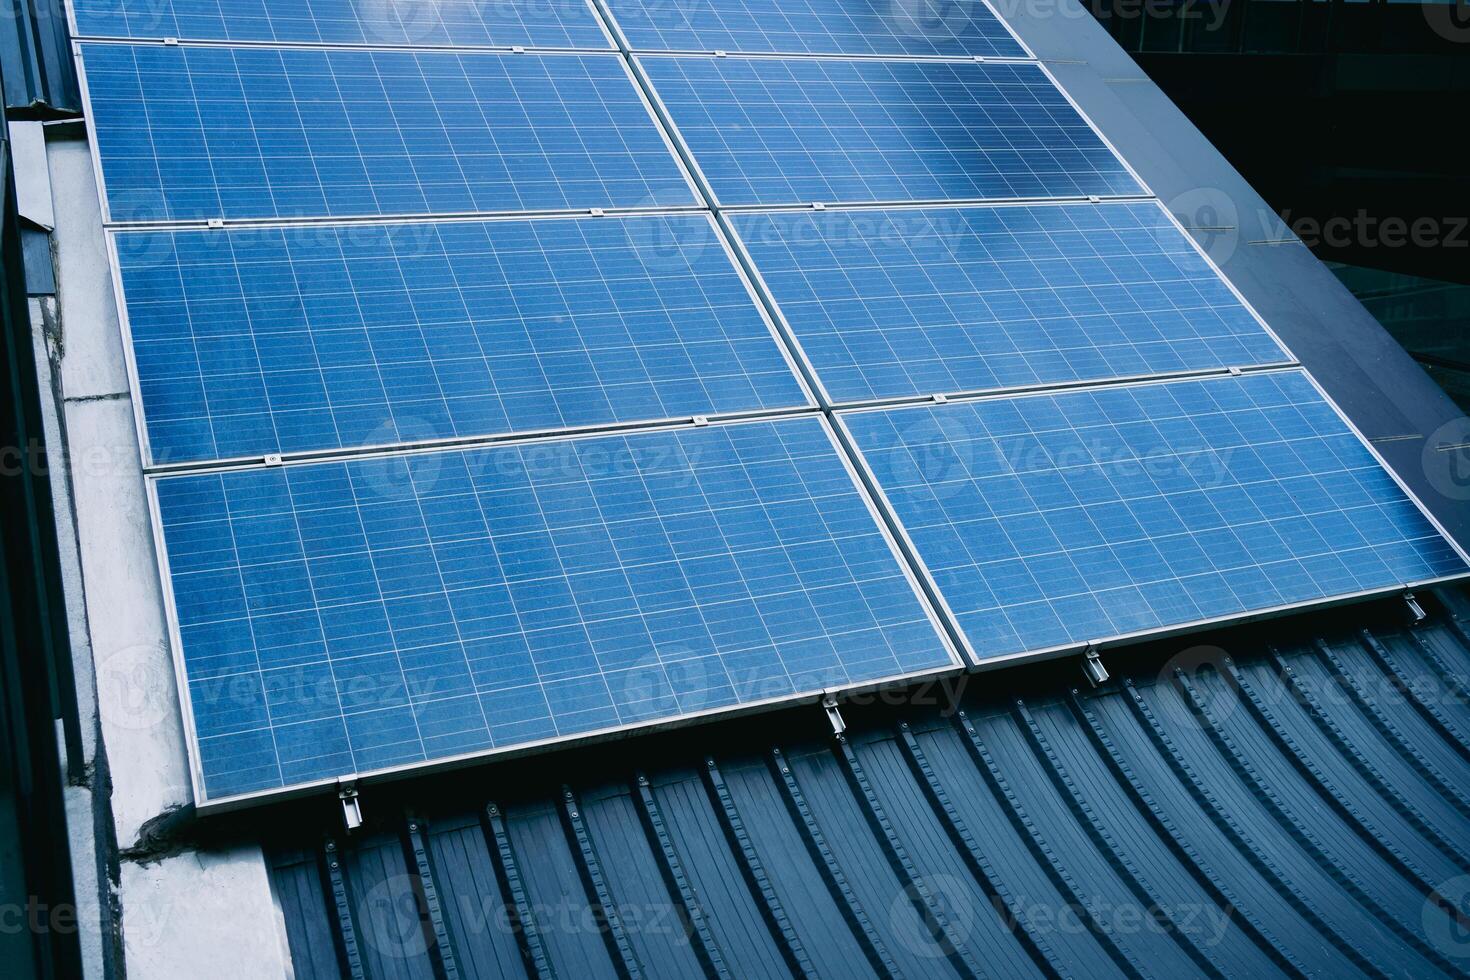 Solar panels on the roof solar panel roof View of the solar panel. renewable energy concept Alternative energy. photo